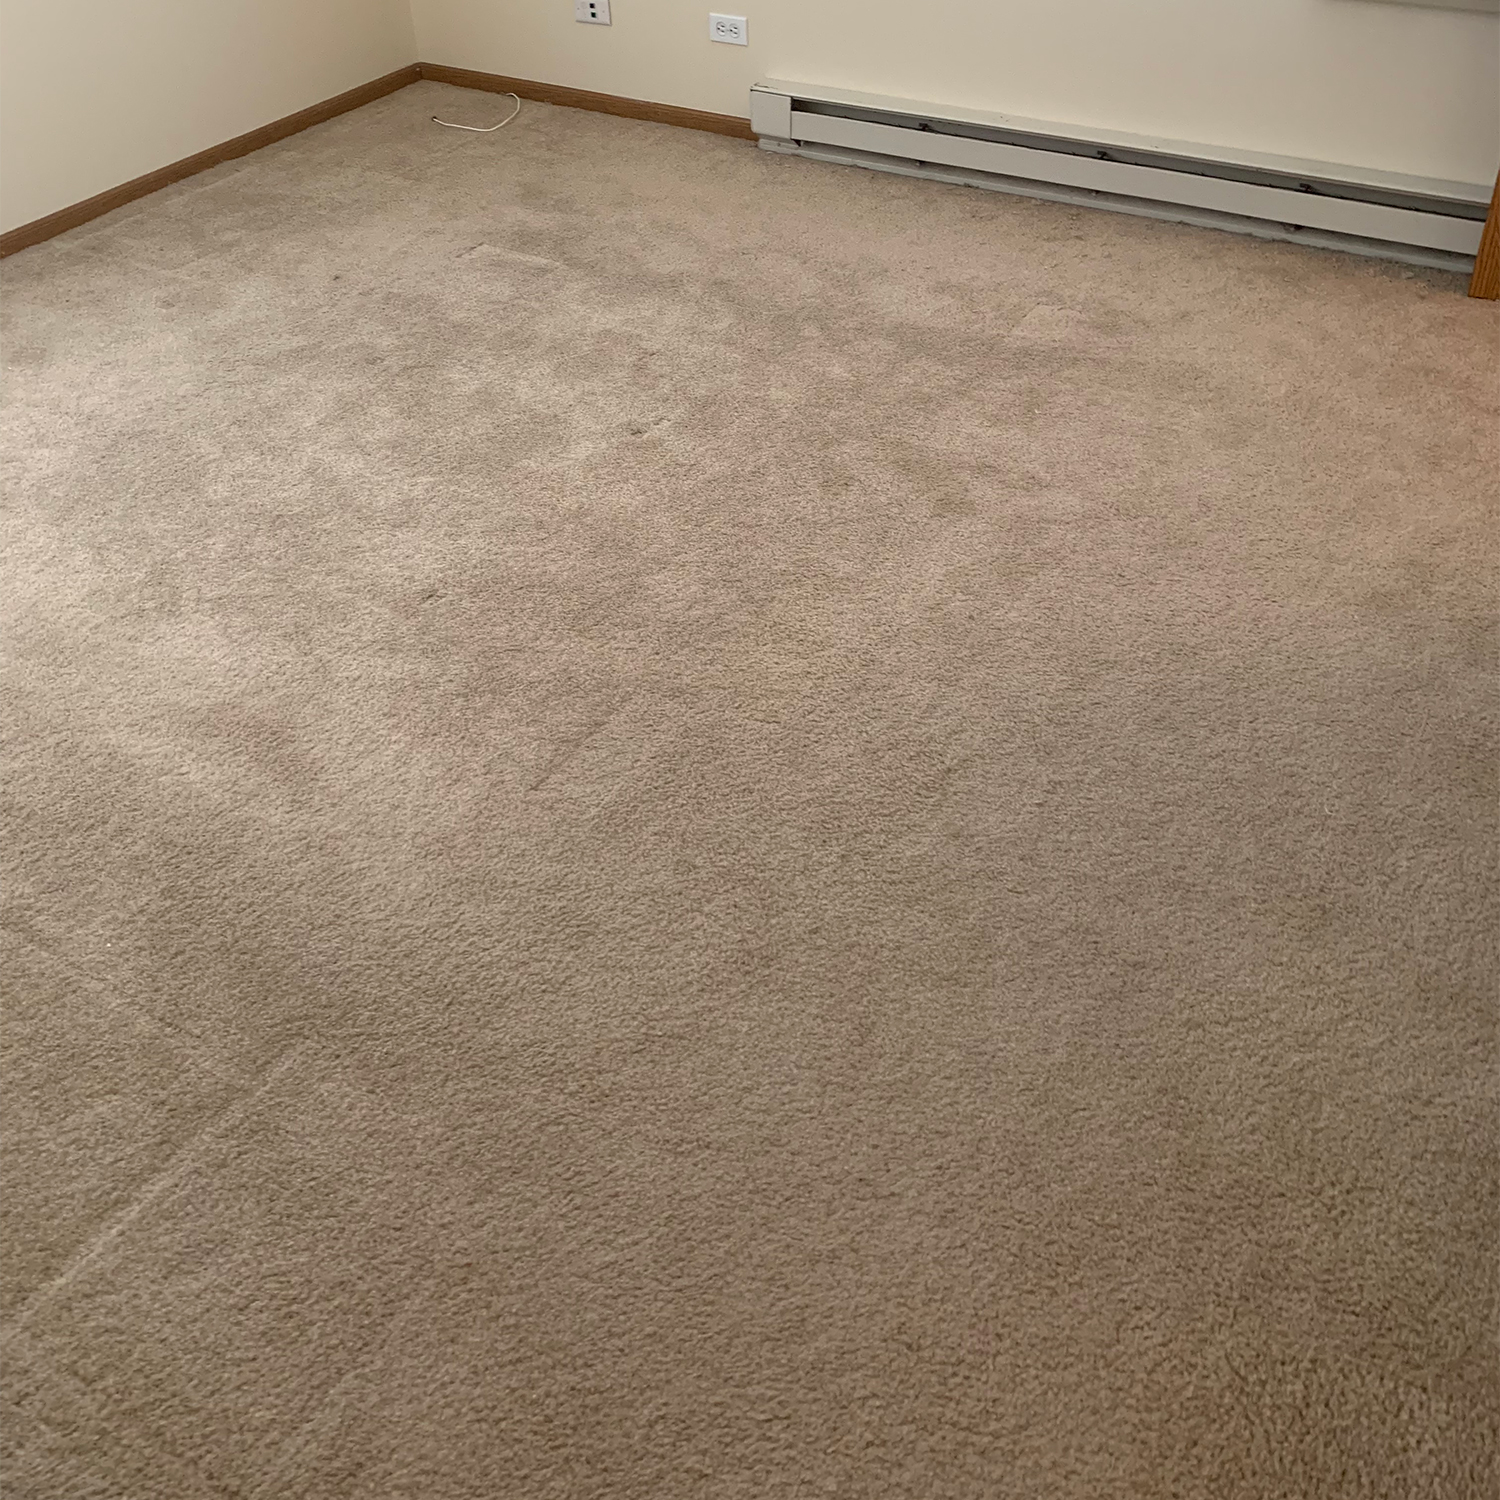 Carpet Cleaning Services in Chicago